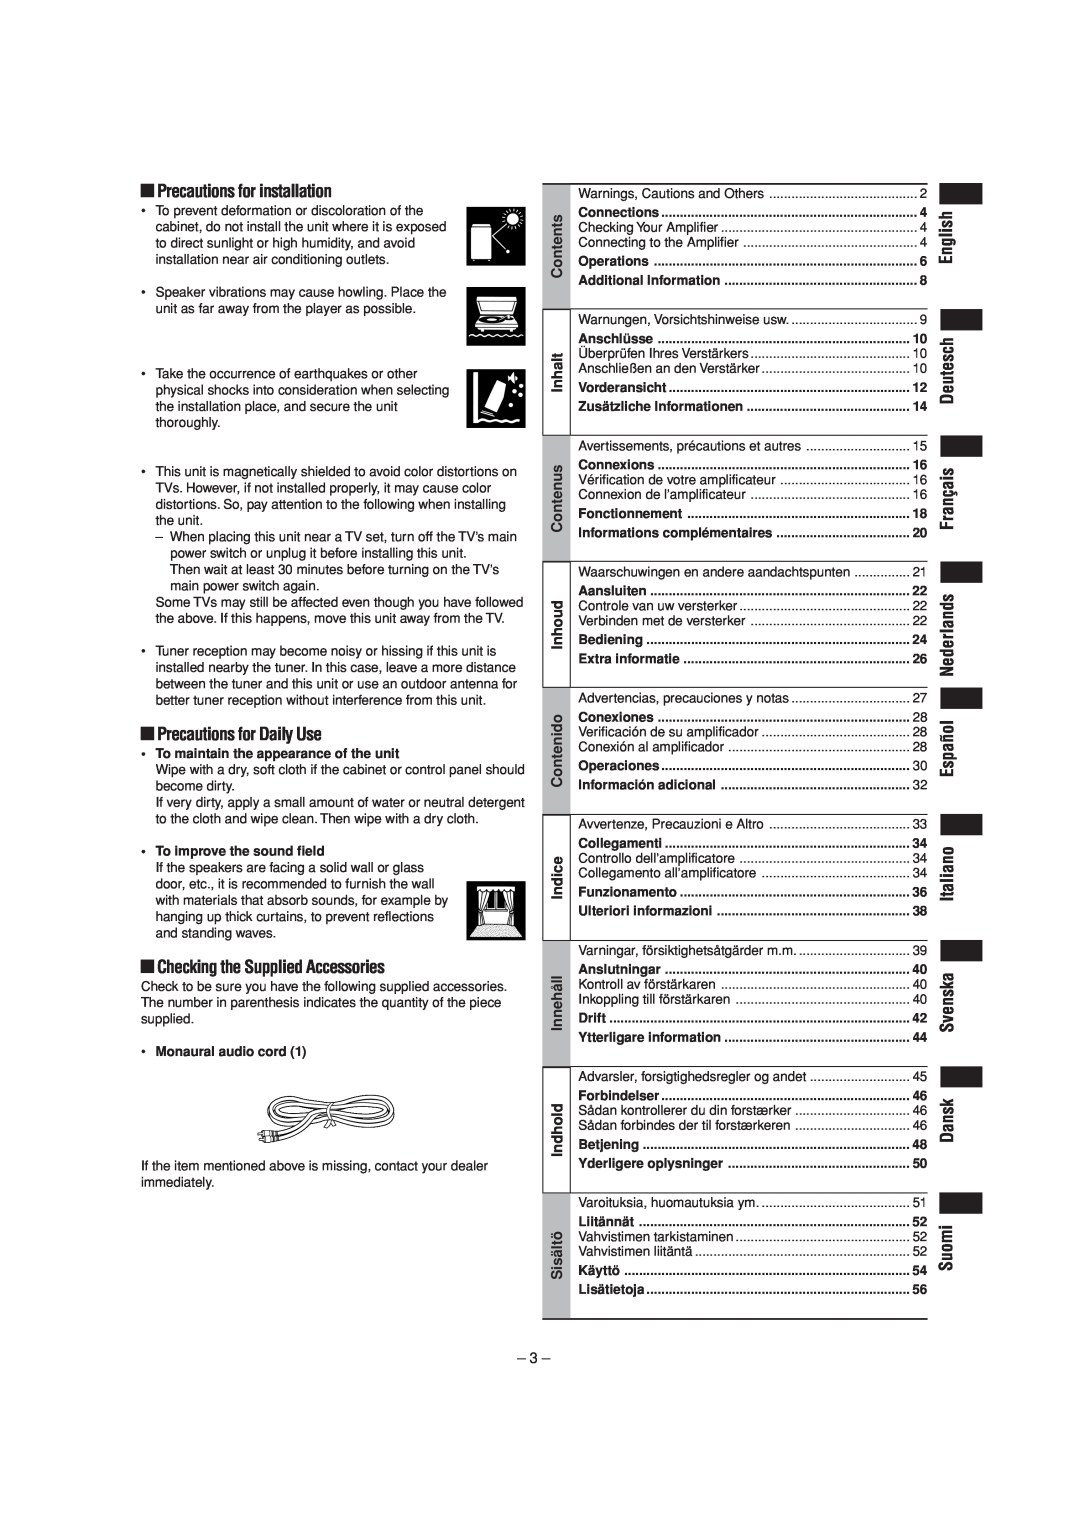 JVC SW-DW303 manual Precautions for installation, Precautions for Daily Use, Checking the Supplied Accessories 